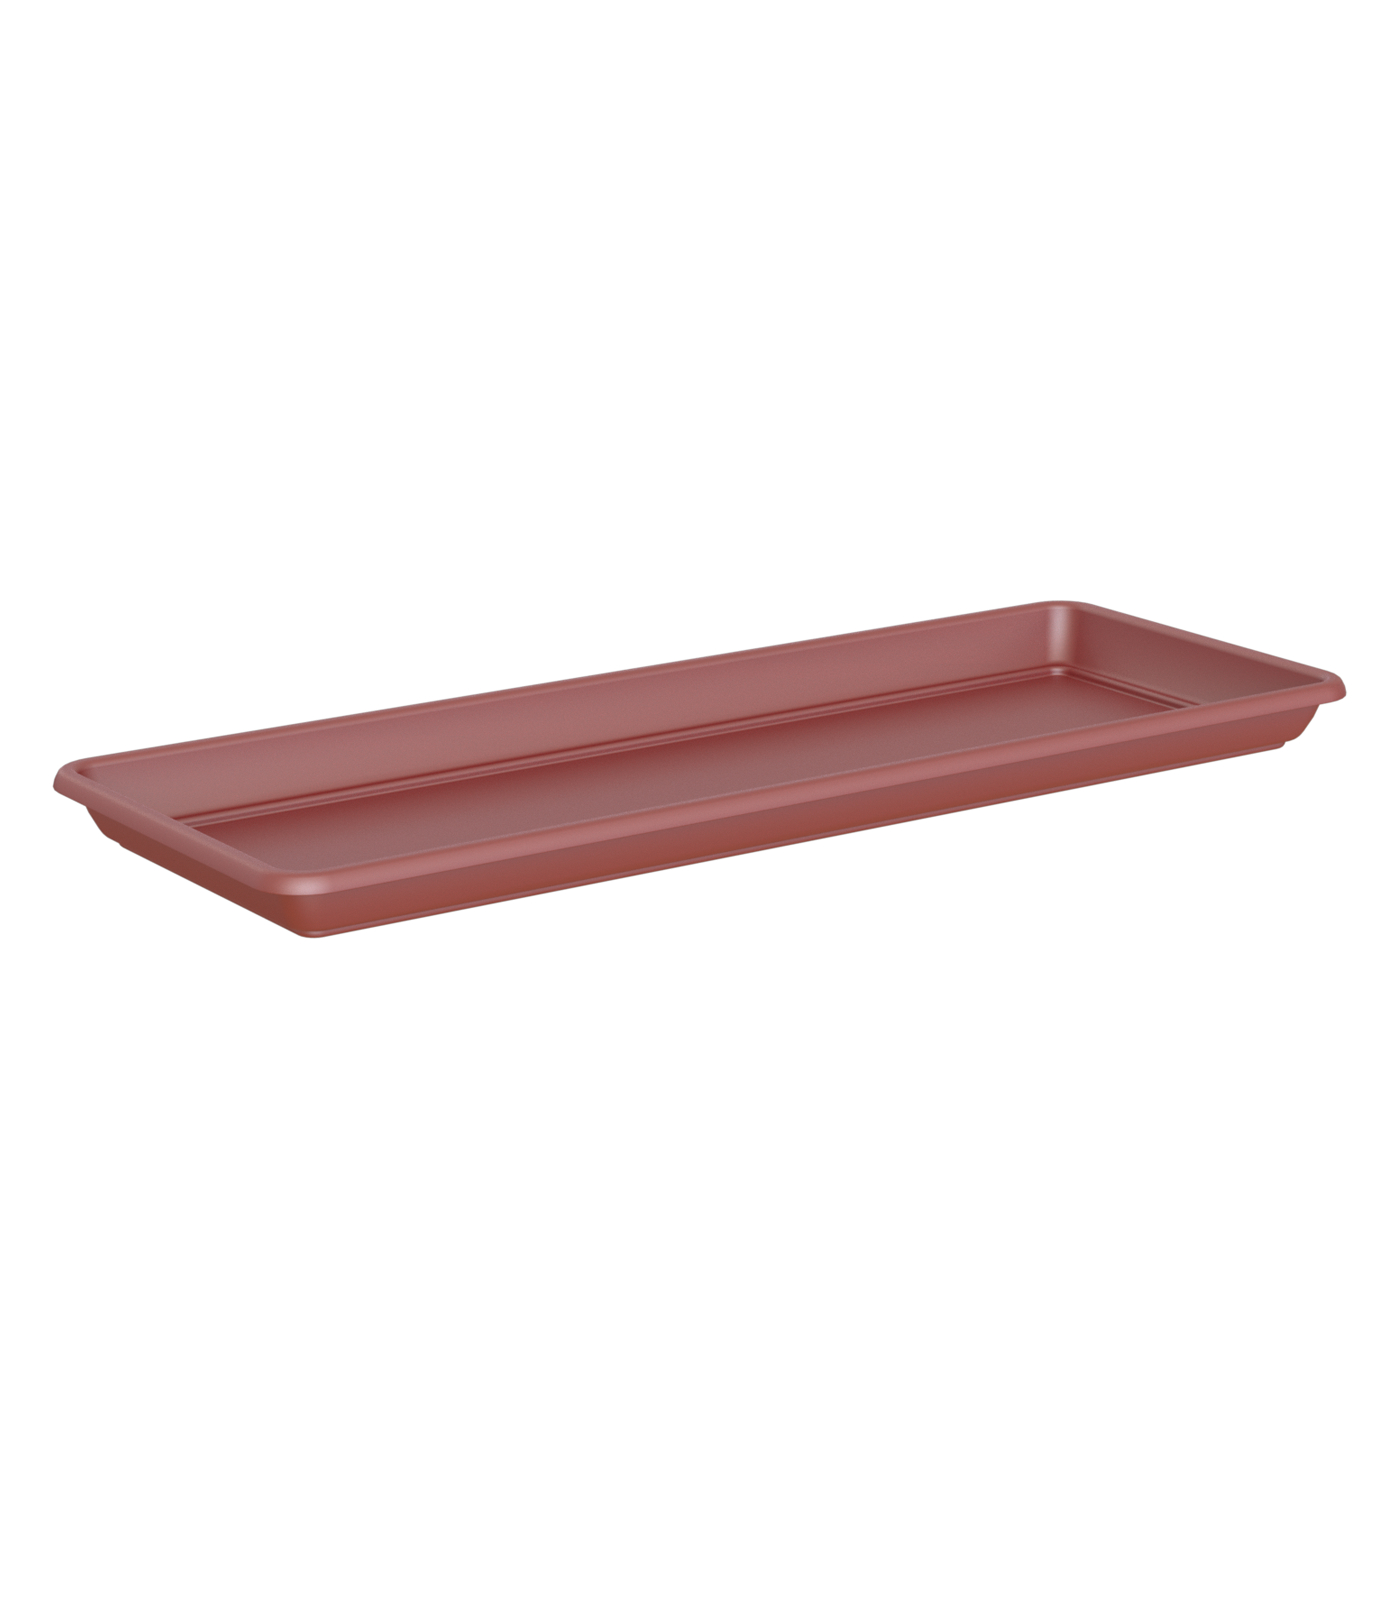 plastic-saucer-recyclable-outdoor-rectangular-red-1